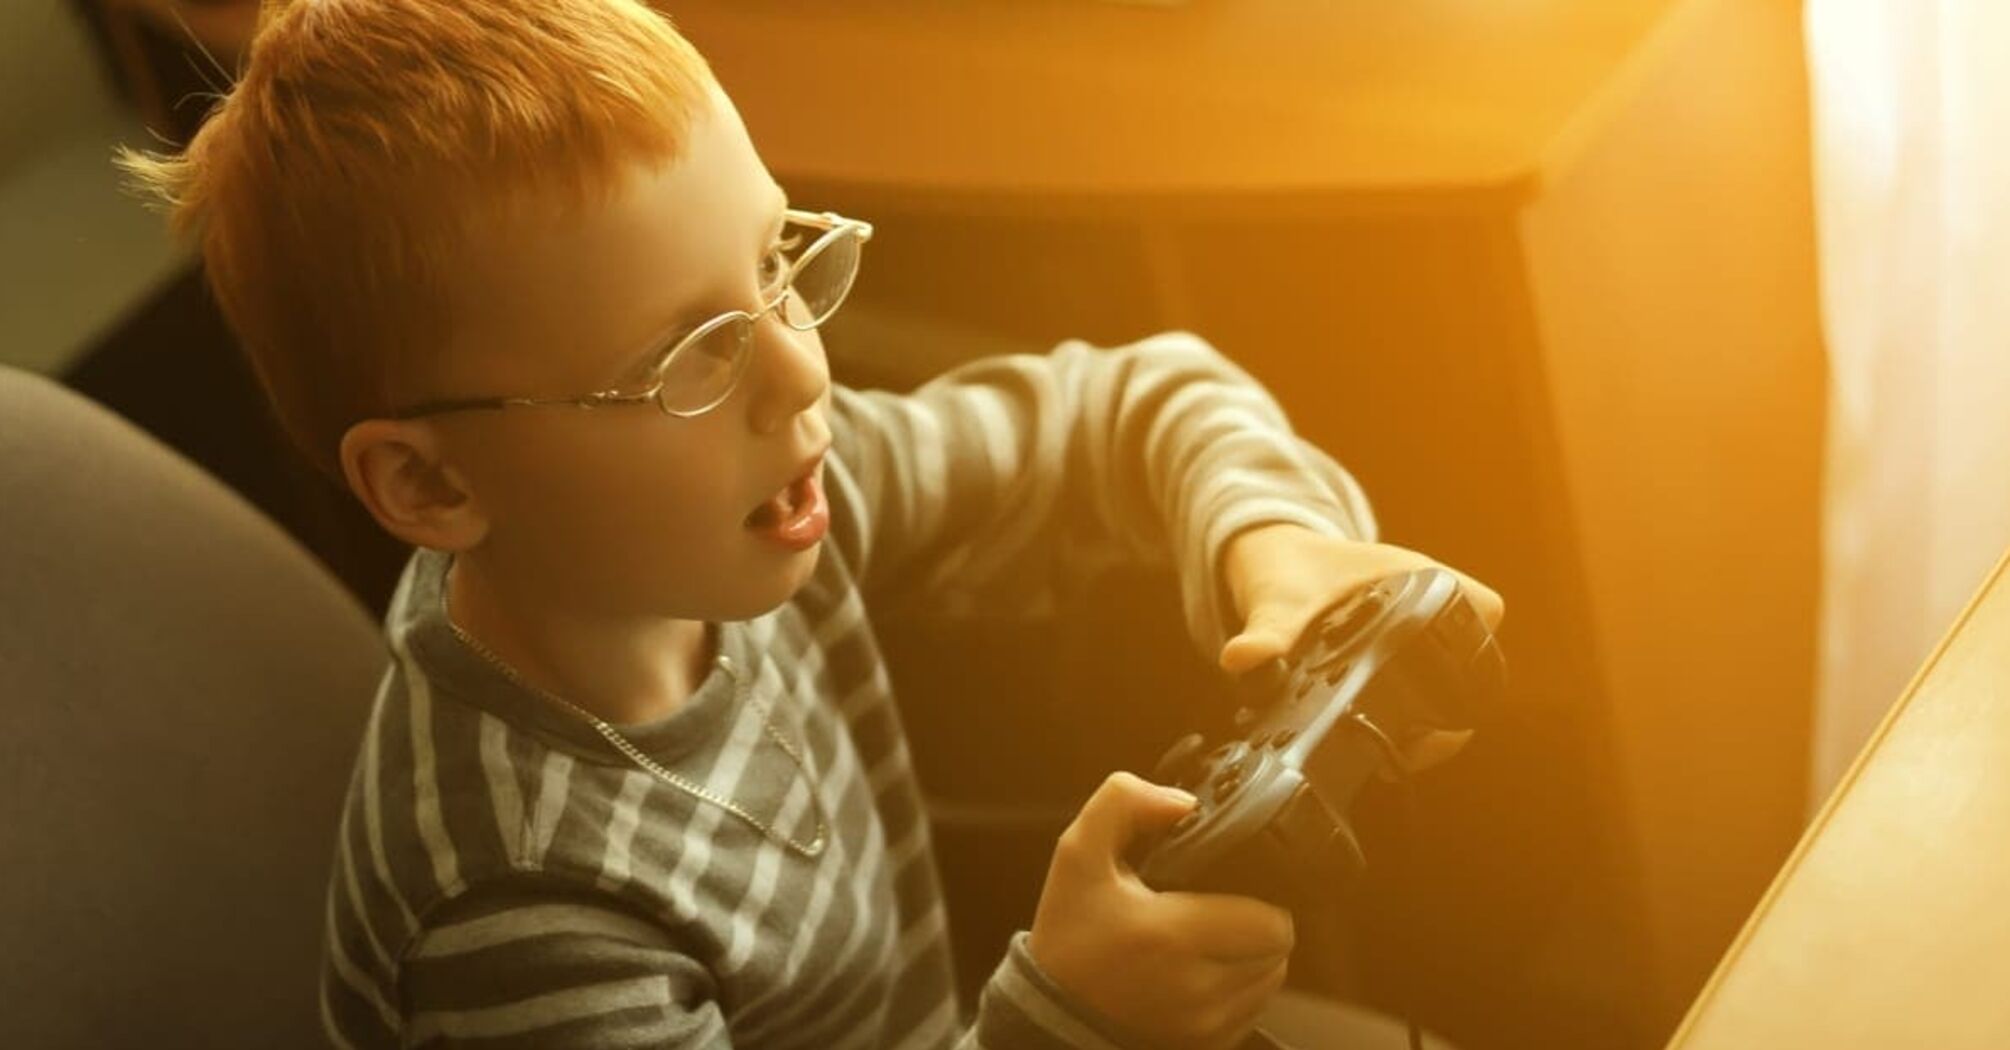 5 useful tips to protect a child from phone and gaming addiction